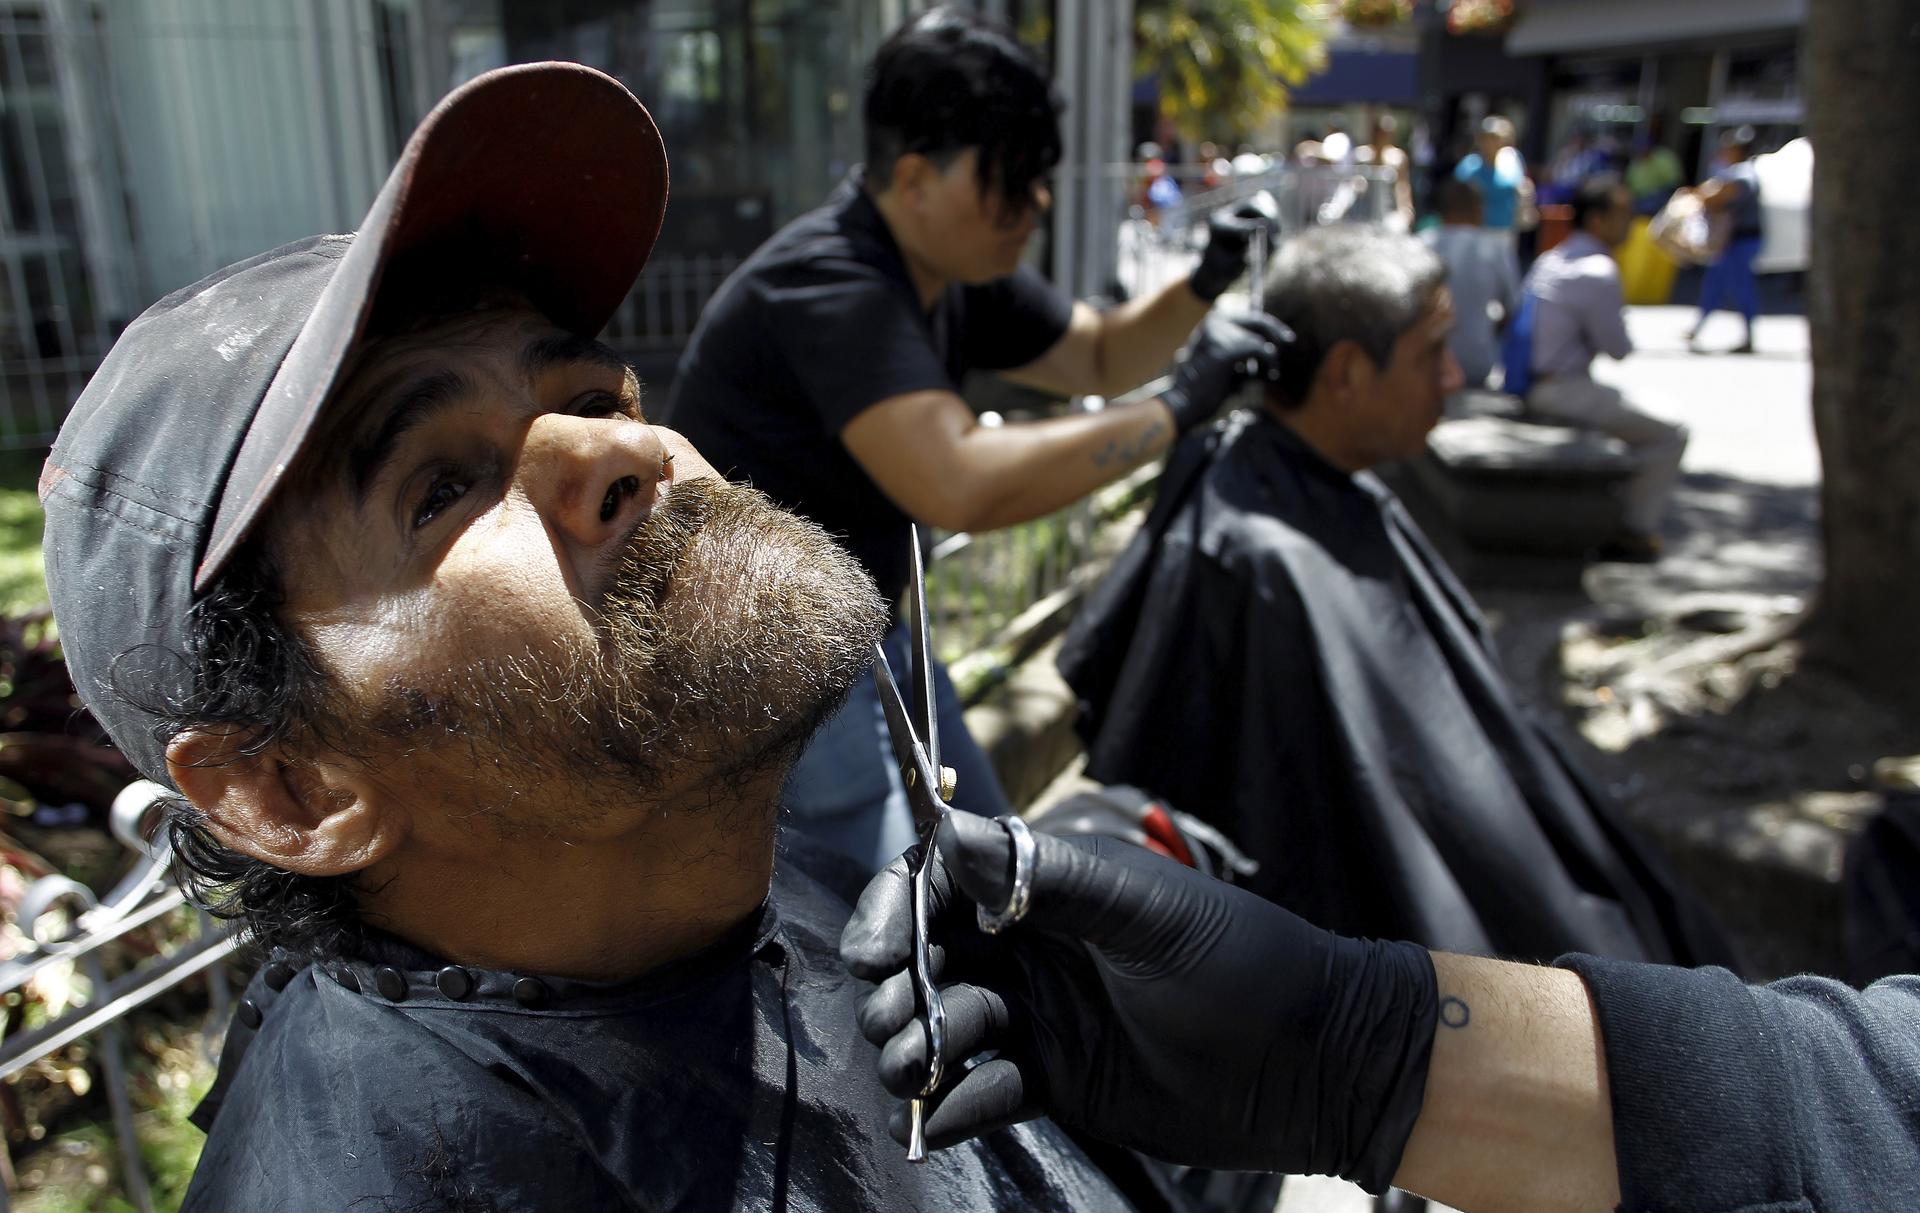 A volunteer from the social work community "Friends of the World" trims the beard of a homeless man in San Jose, Costa Rica February 24, 2016. 